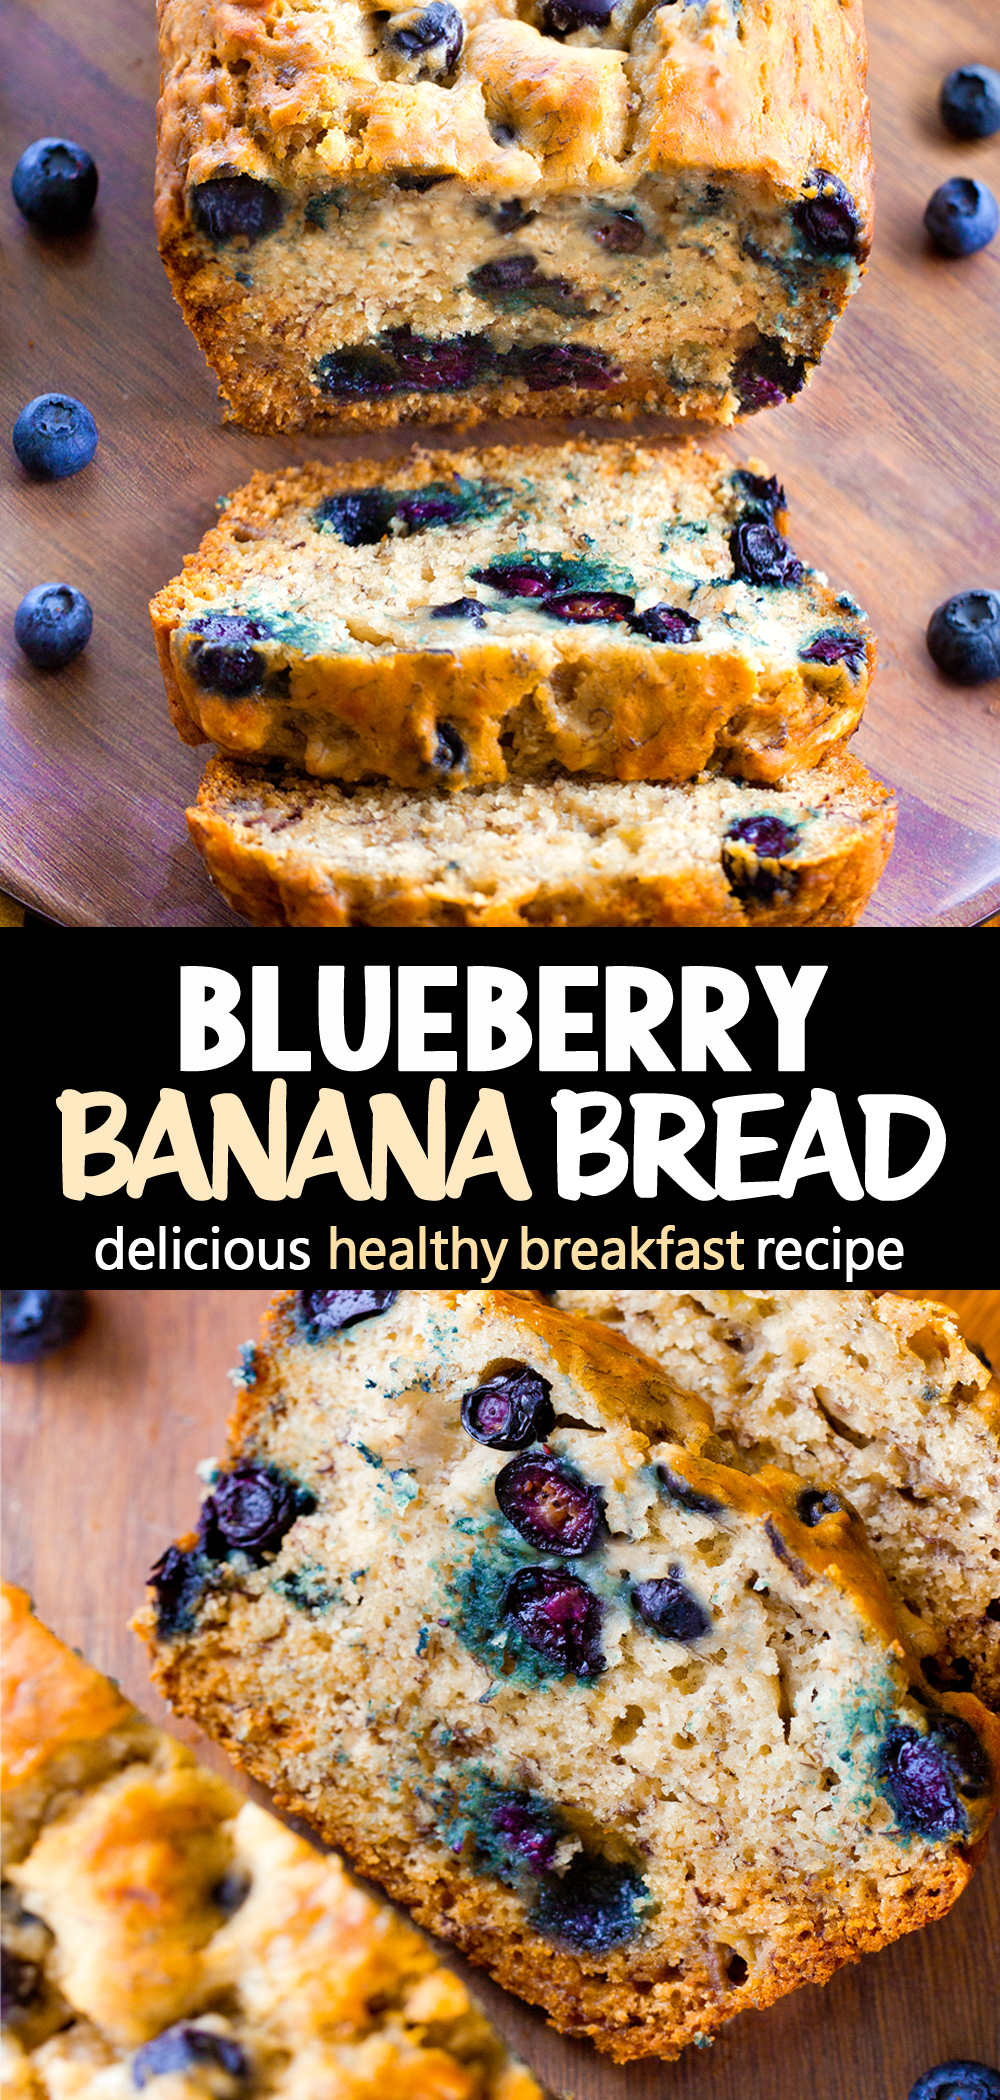 https://chocolatecoveredkatie.com/wp-content/uploads/2018/01/The-Best-Easy-Healthy-Blueberry-Banana-Bread-Recipe.png